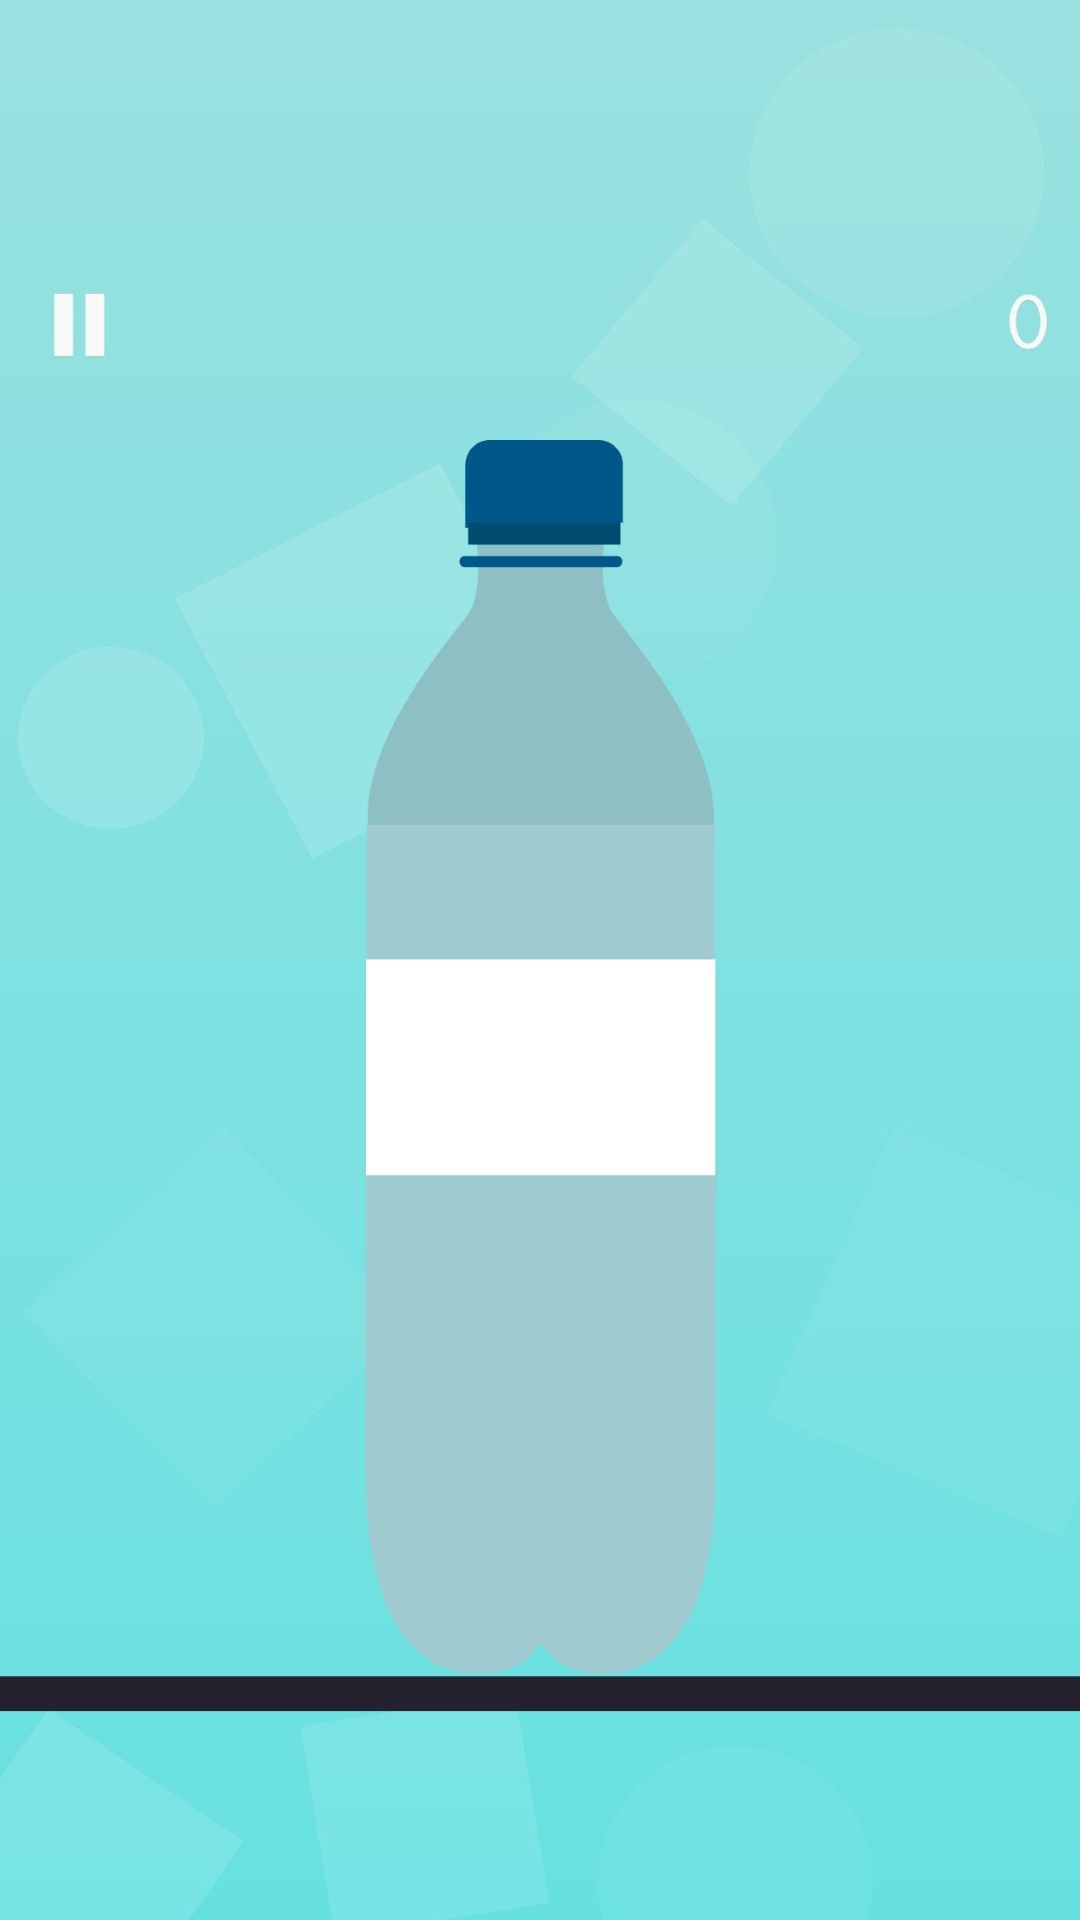 Water Bottle Flip Challenge: Amazon.ca: Appstore for Android